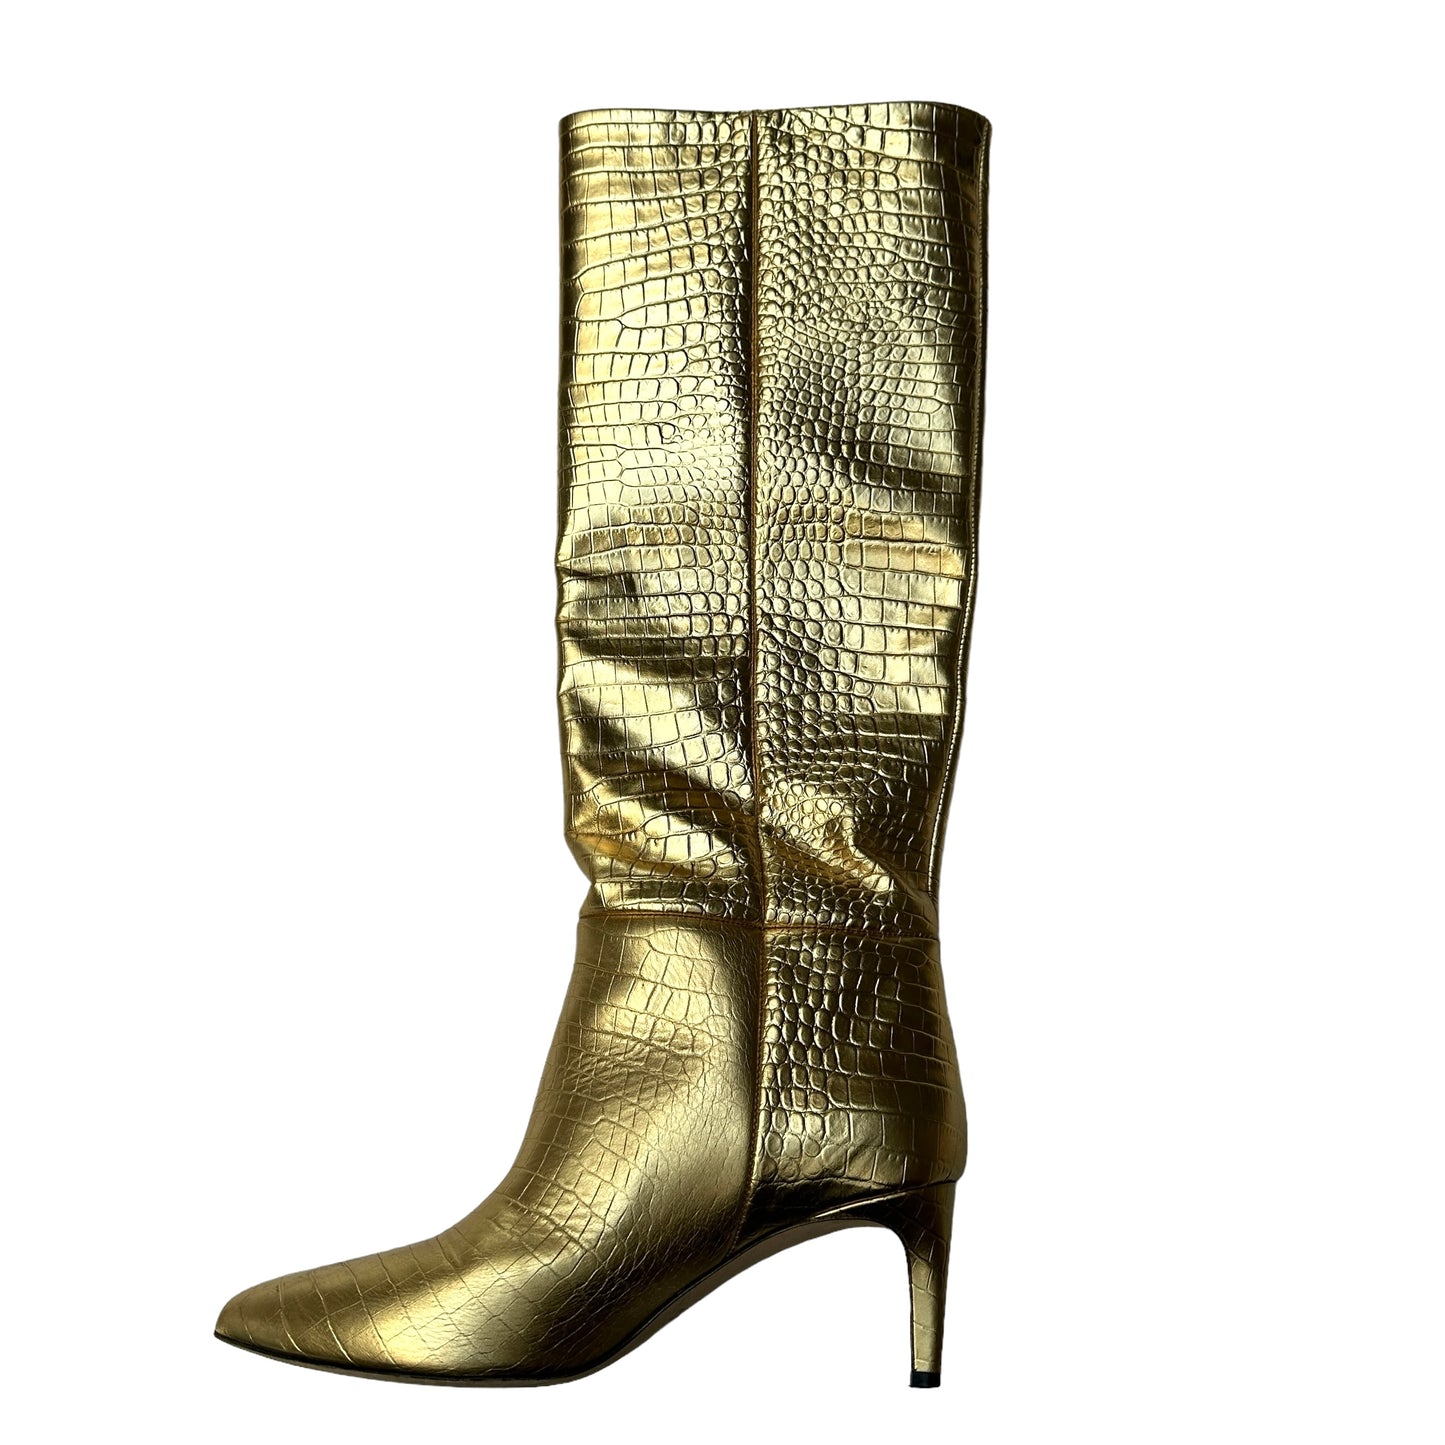 Gold Embossed Leather Boots - 7.5